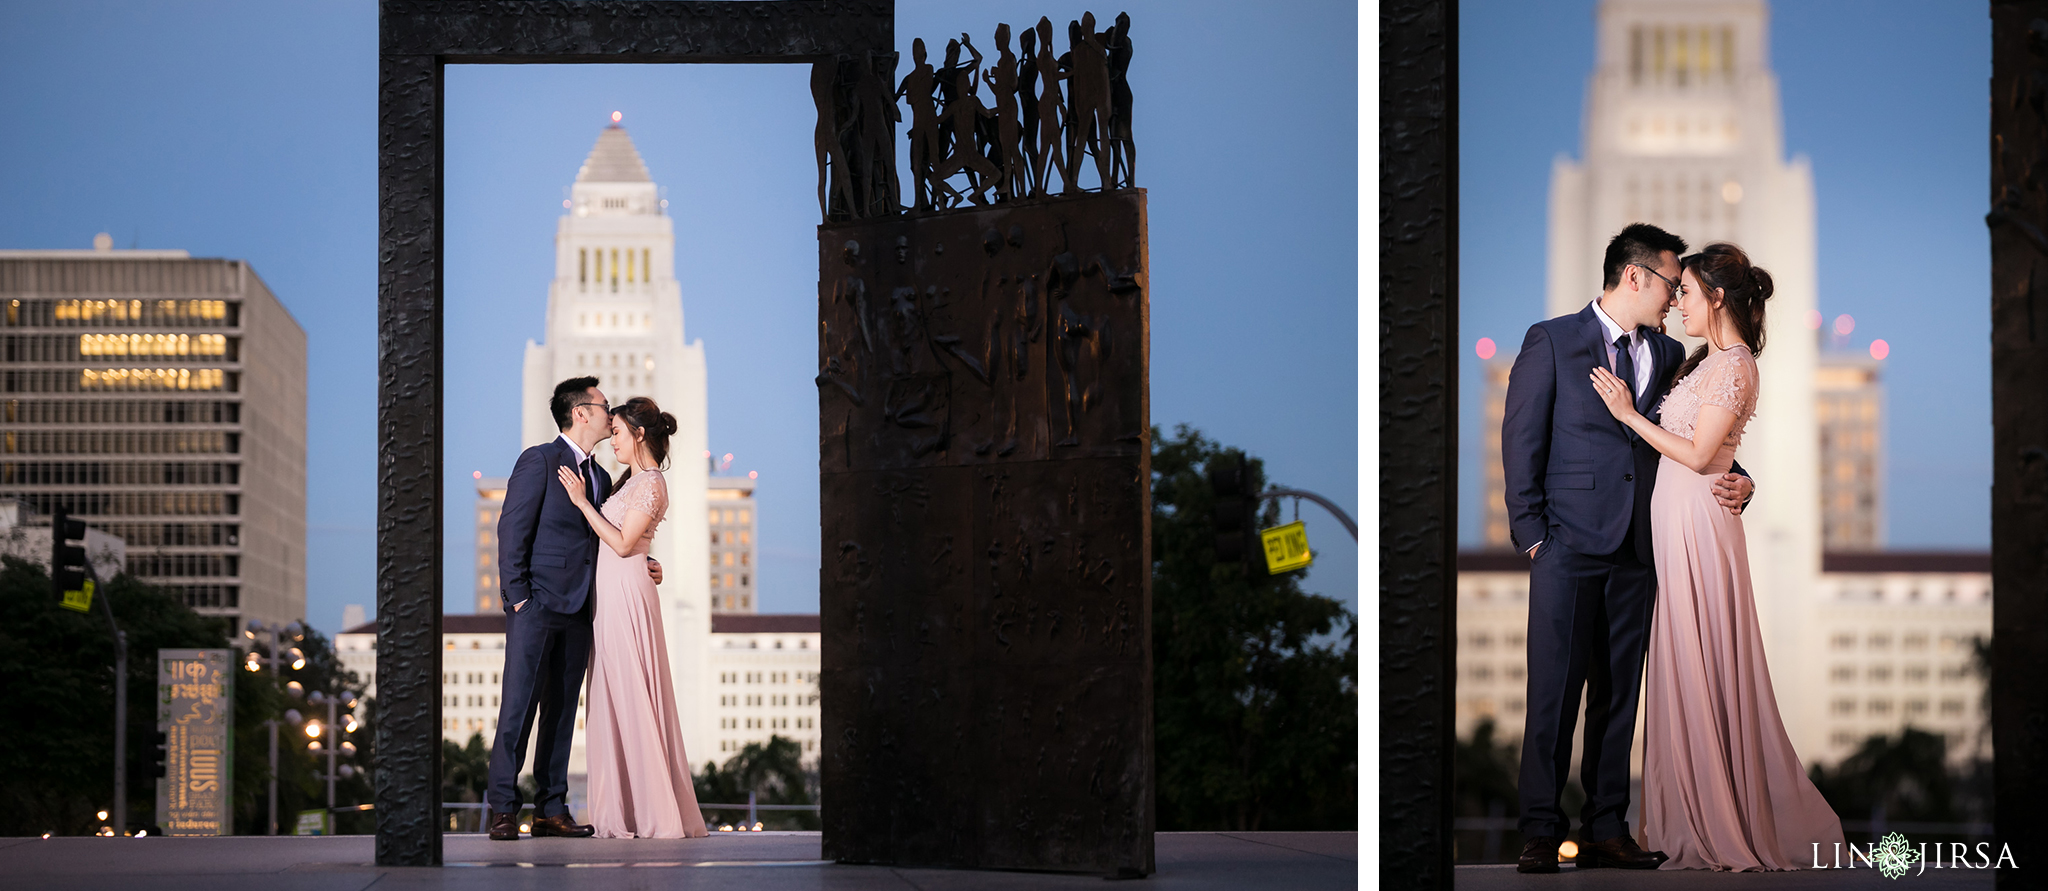 09-downtown-los-angeles-engagement-photography